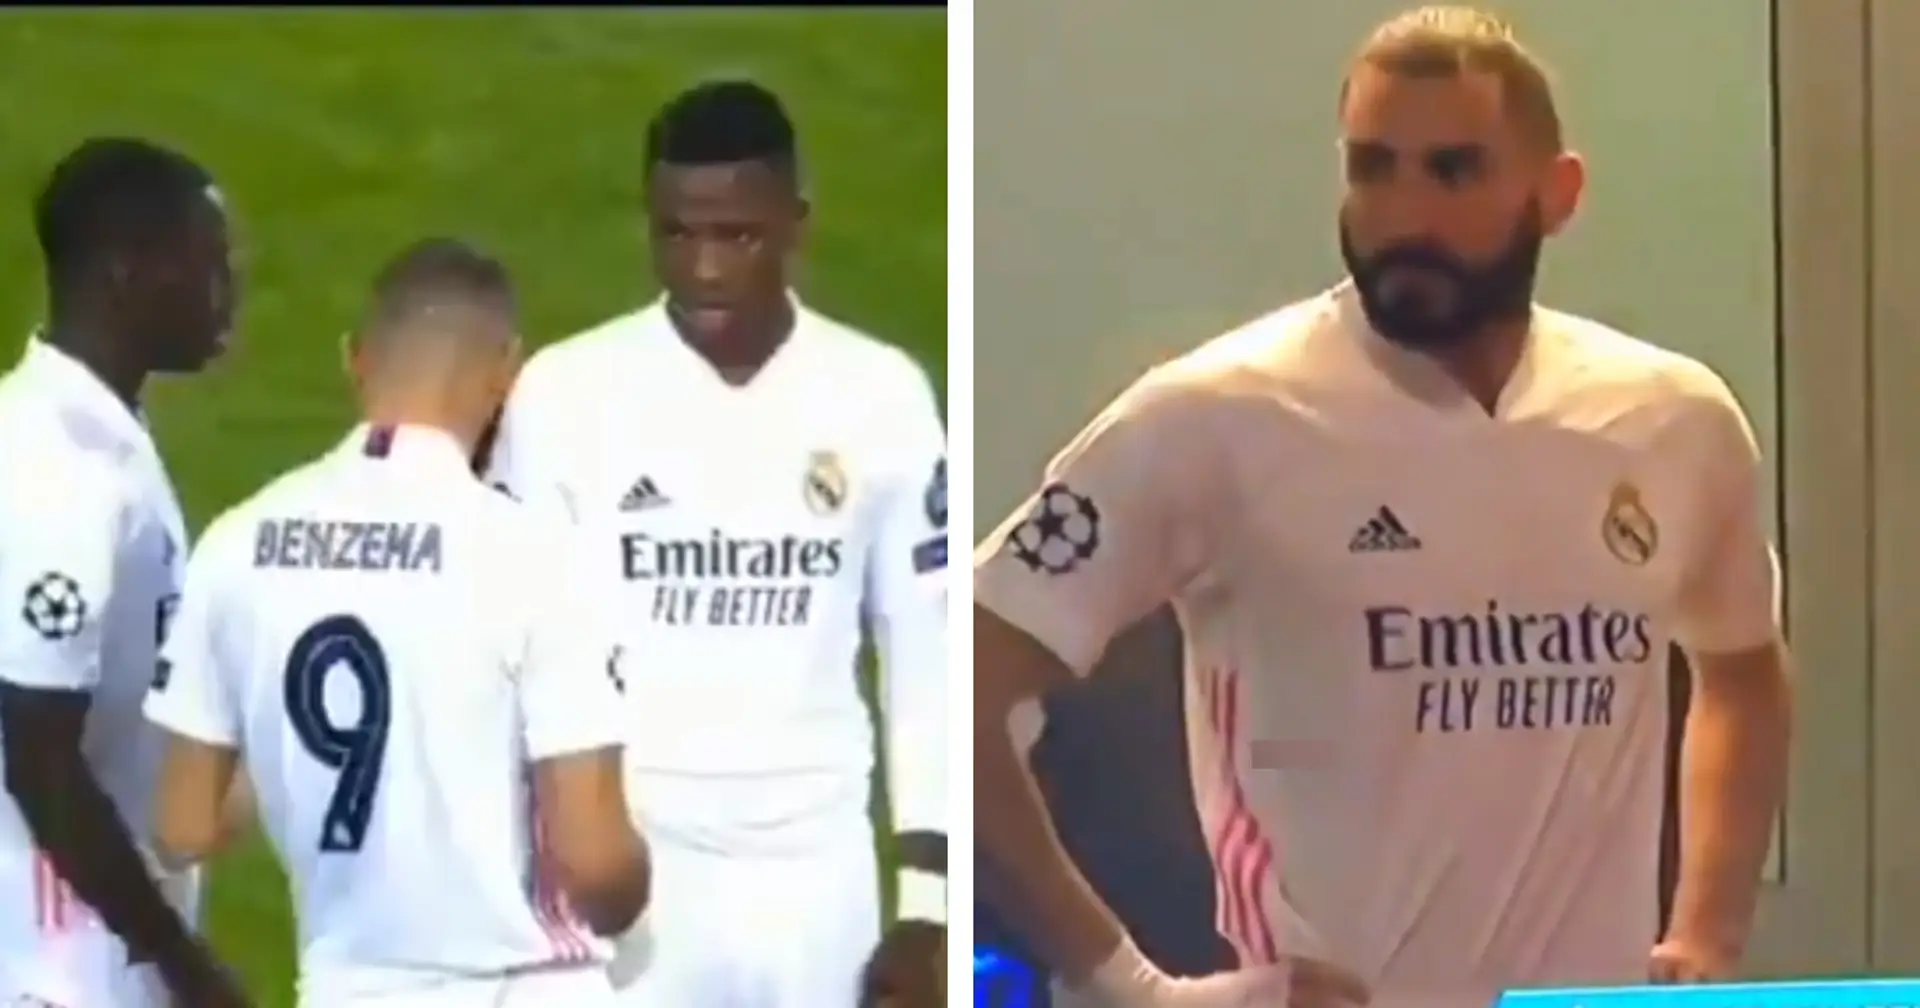 'Don't play with Vinicius, he plays against us': Half-time chat between Mendy and Benzema caught on camera